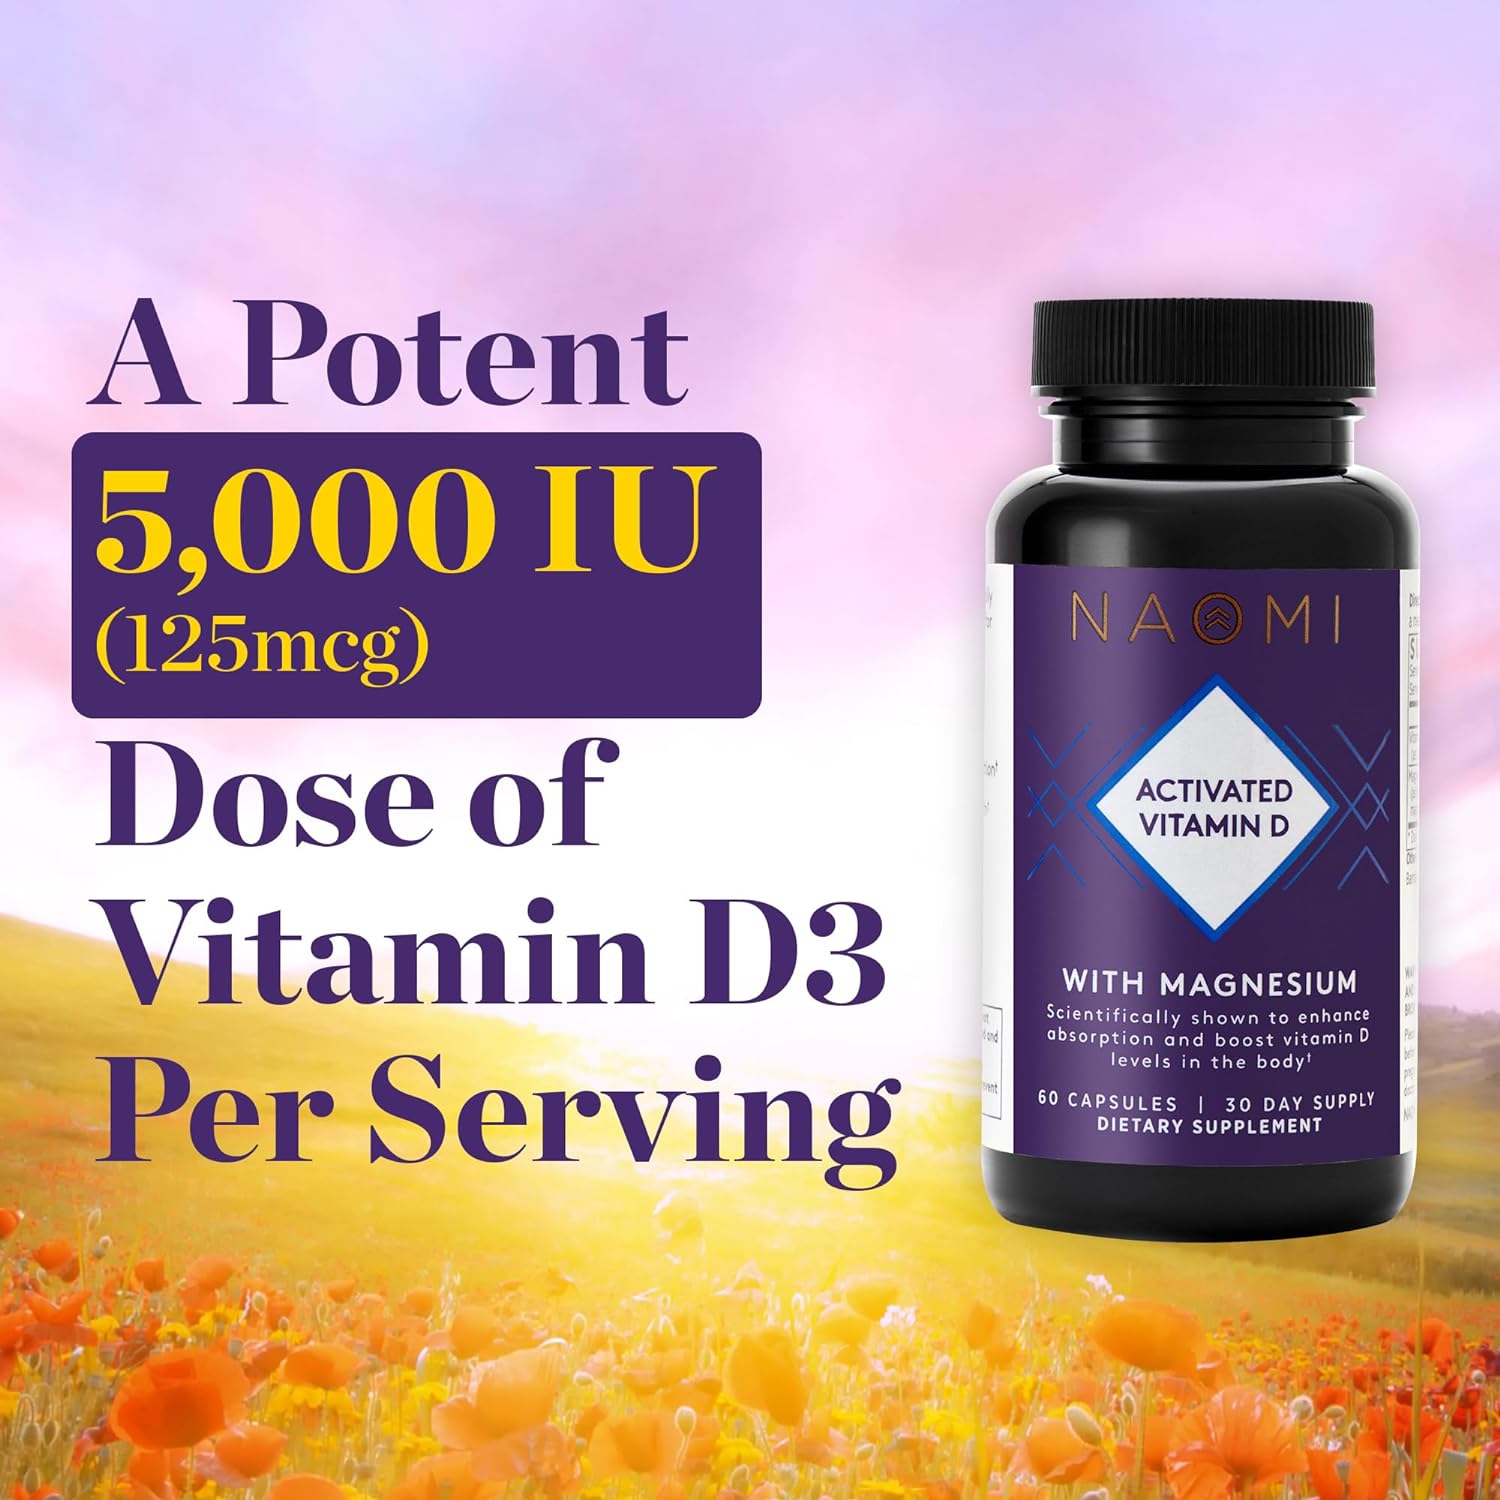 NAOMI Activated Vitamin D3 5000 IU (125 mcg) Supplement with Magnesium for Strong Bones, Teeth, Muscle, Immune and Mood Support, Non-GMO, Gluten Free, 60 Veggie Caps, 30 Day Supply : Health & Household